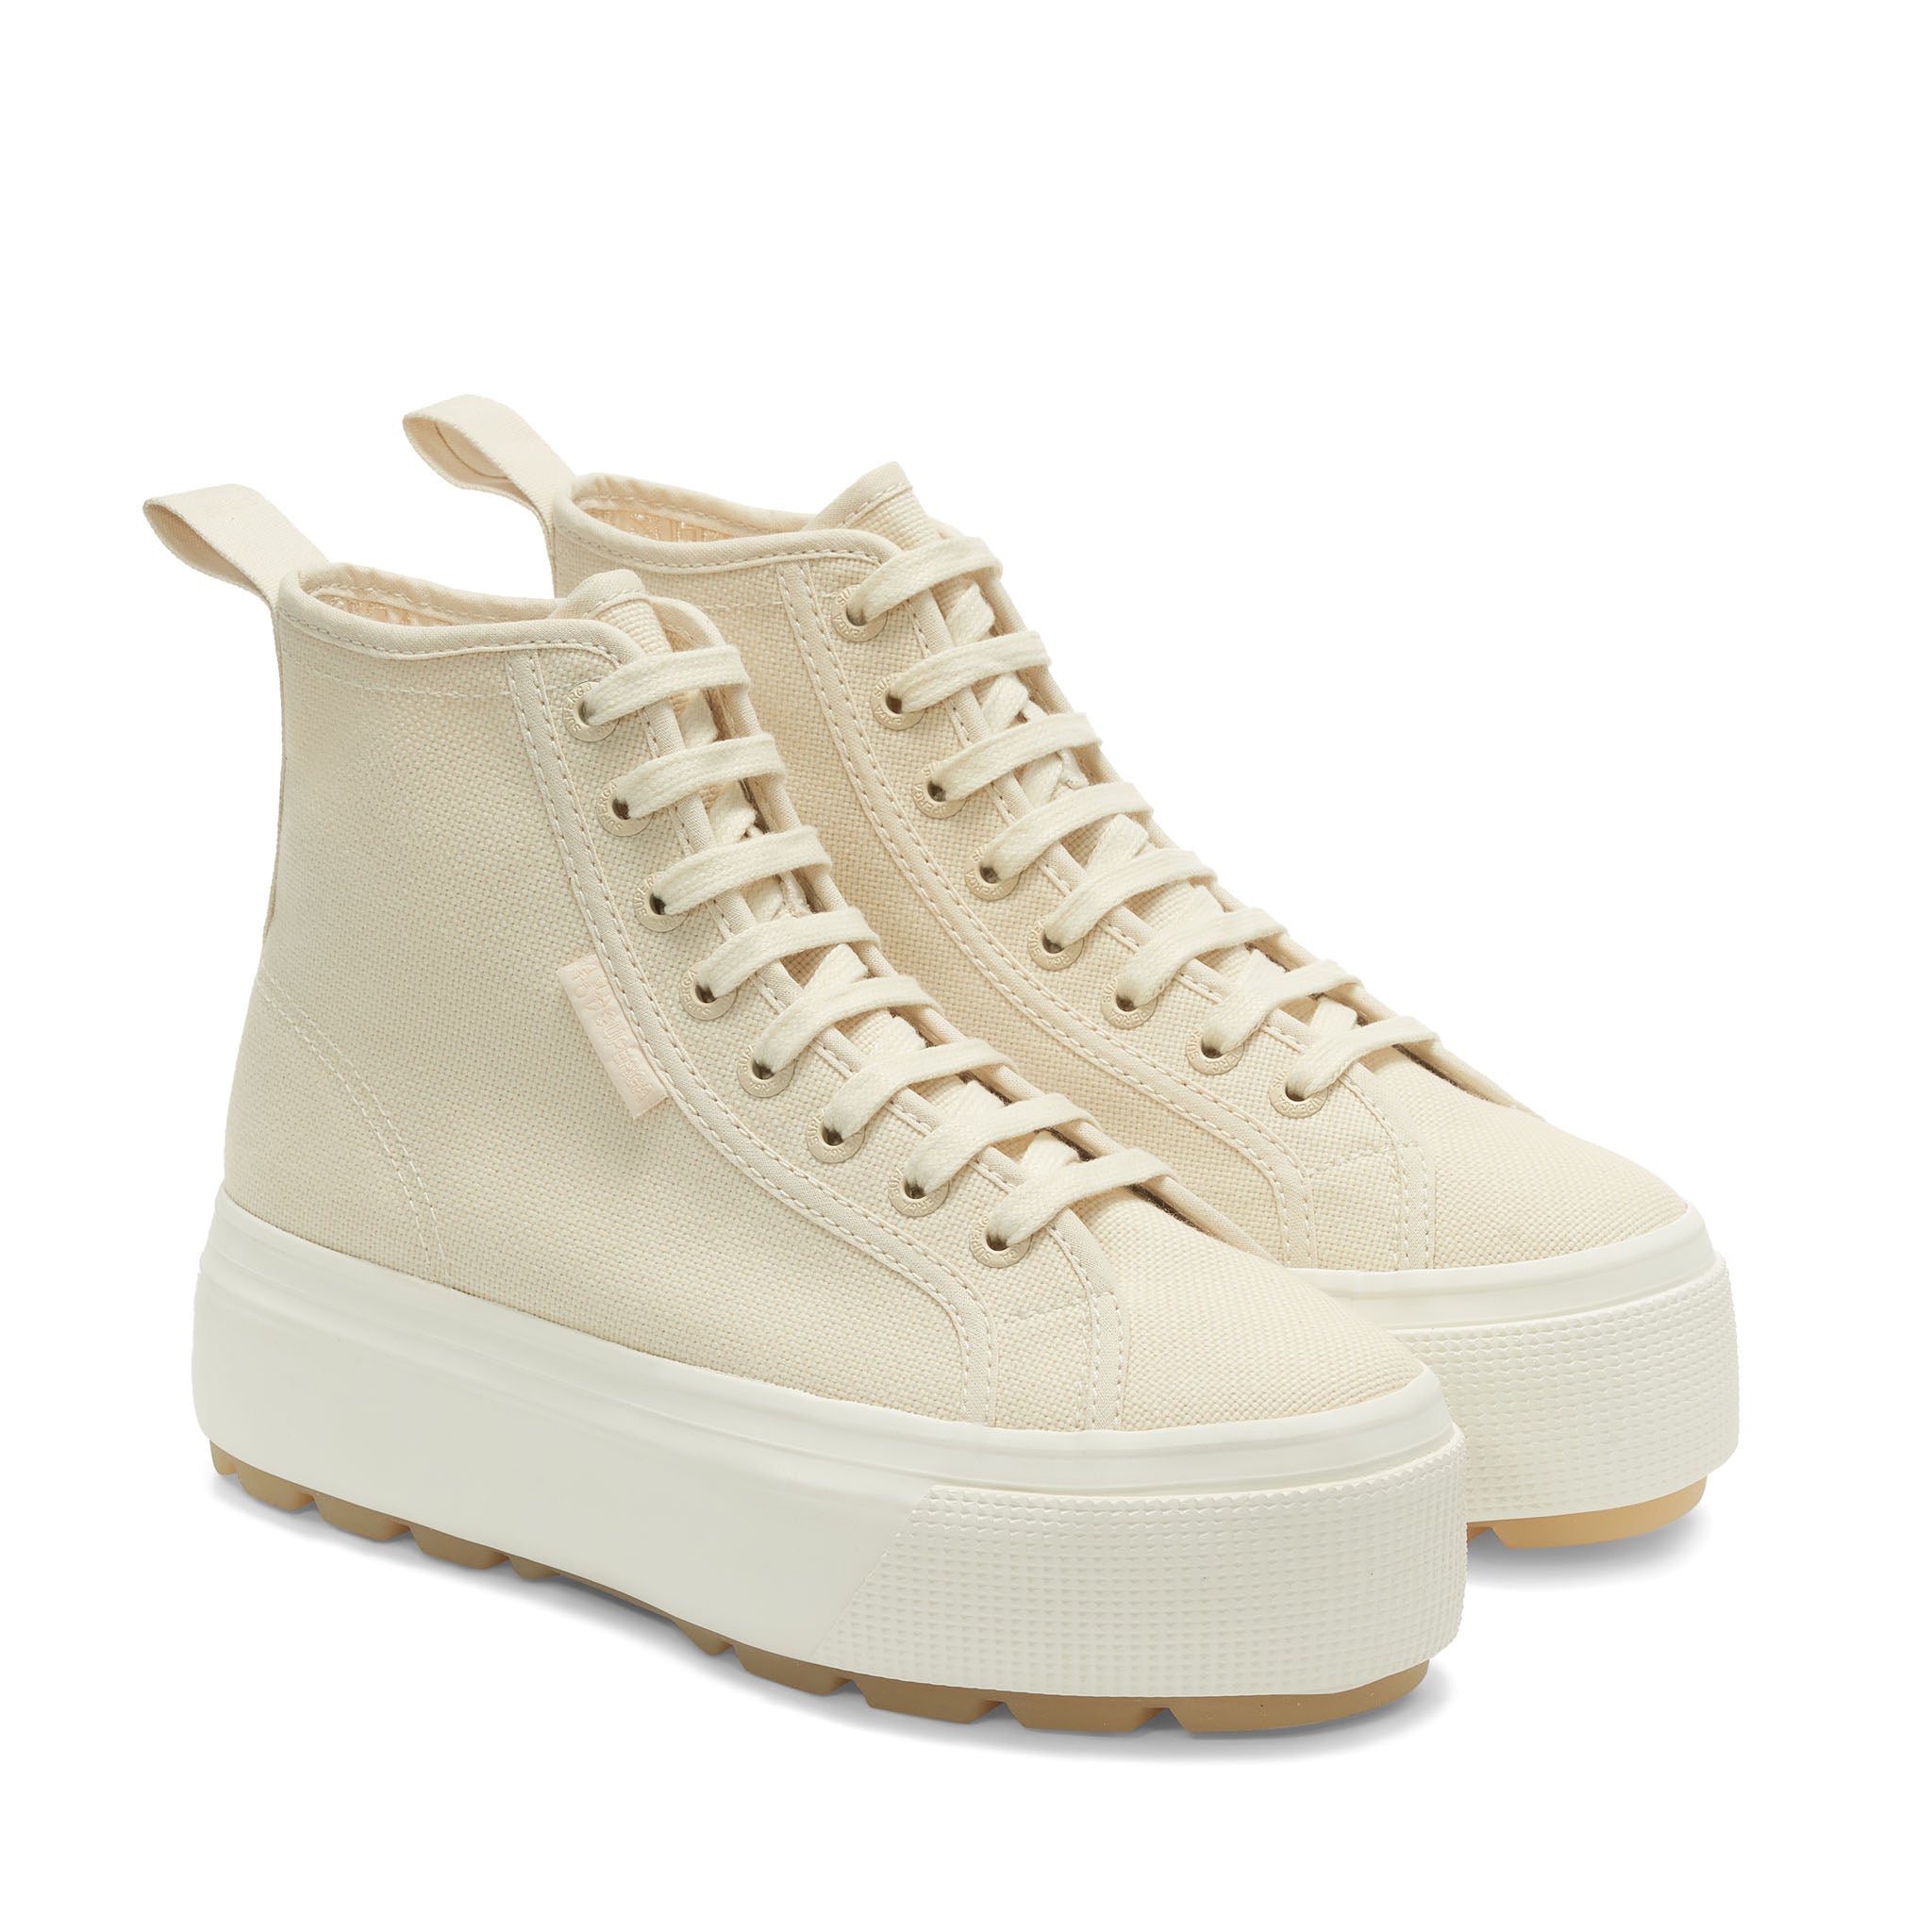 Superga 2708 High Top Tank Sneakers - Eggshell. Front view.